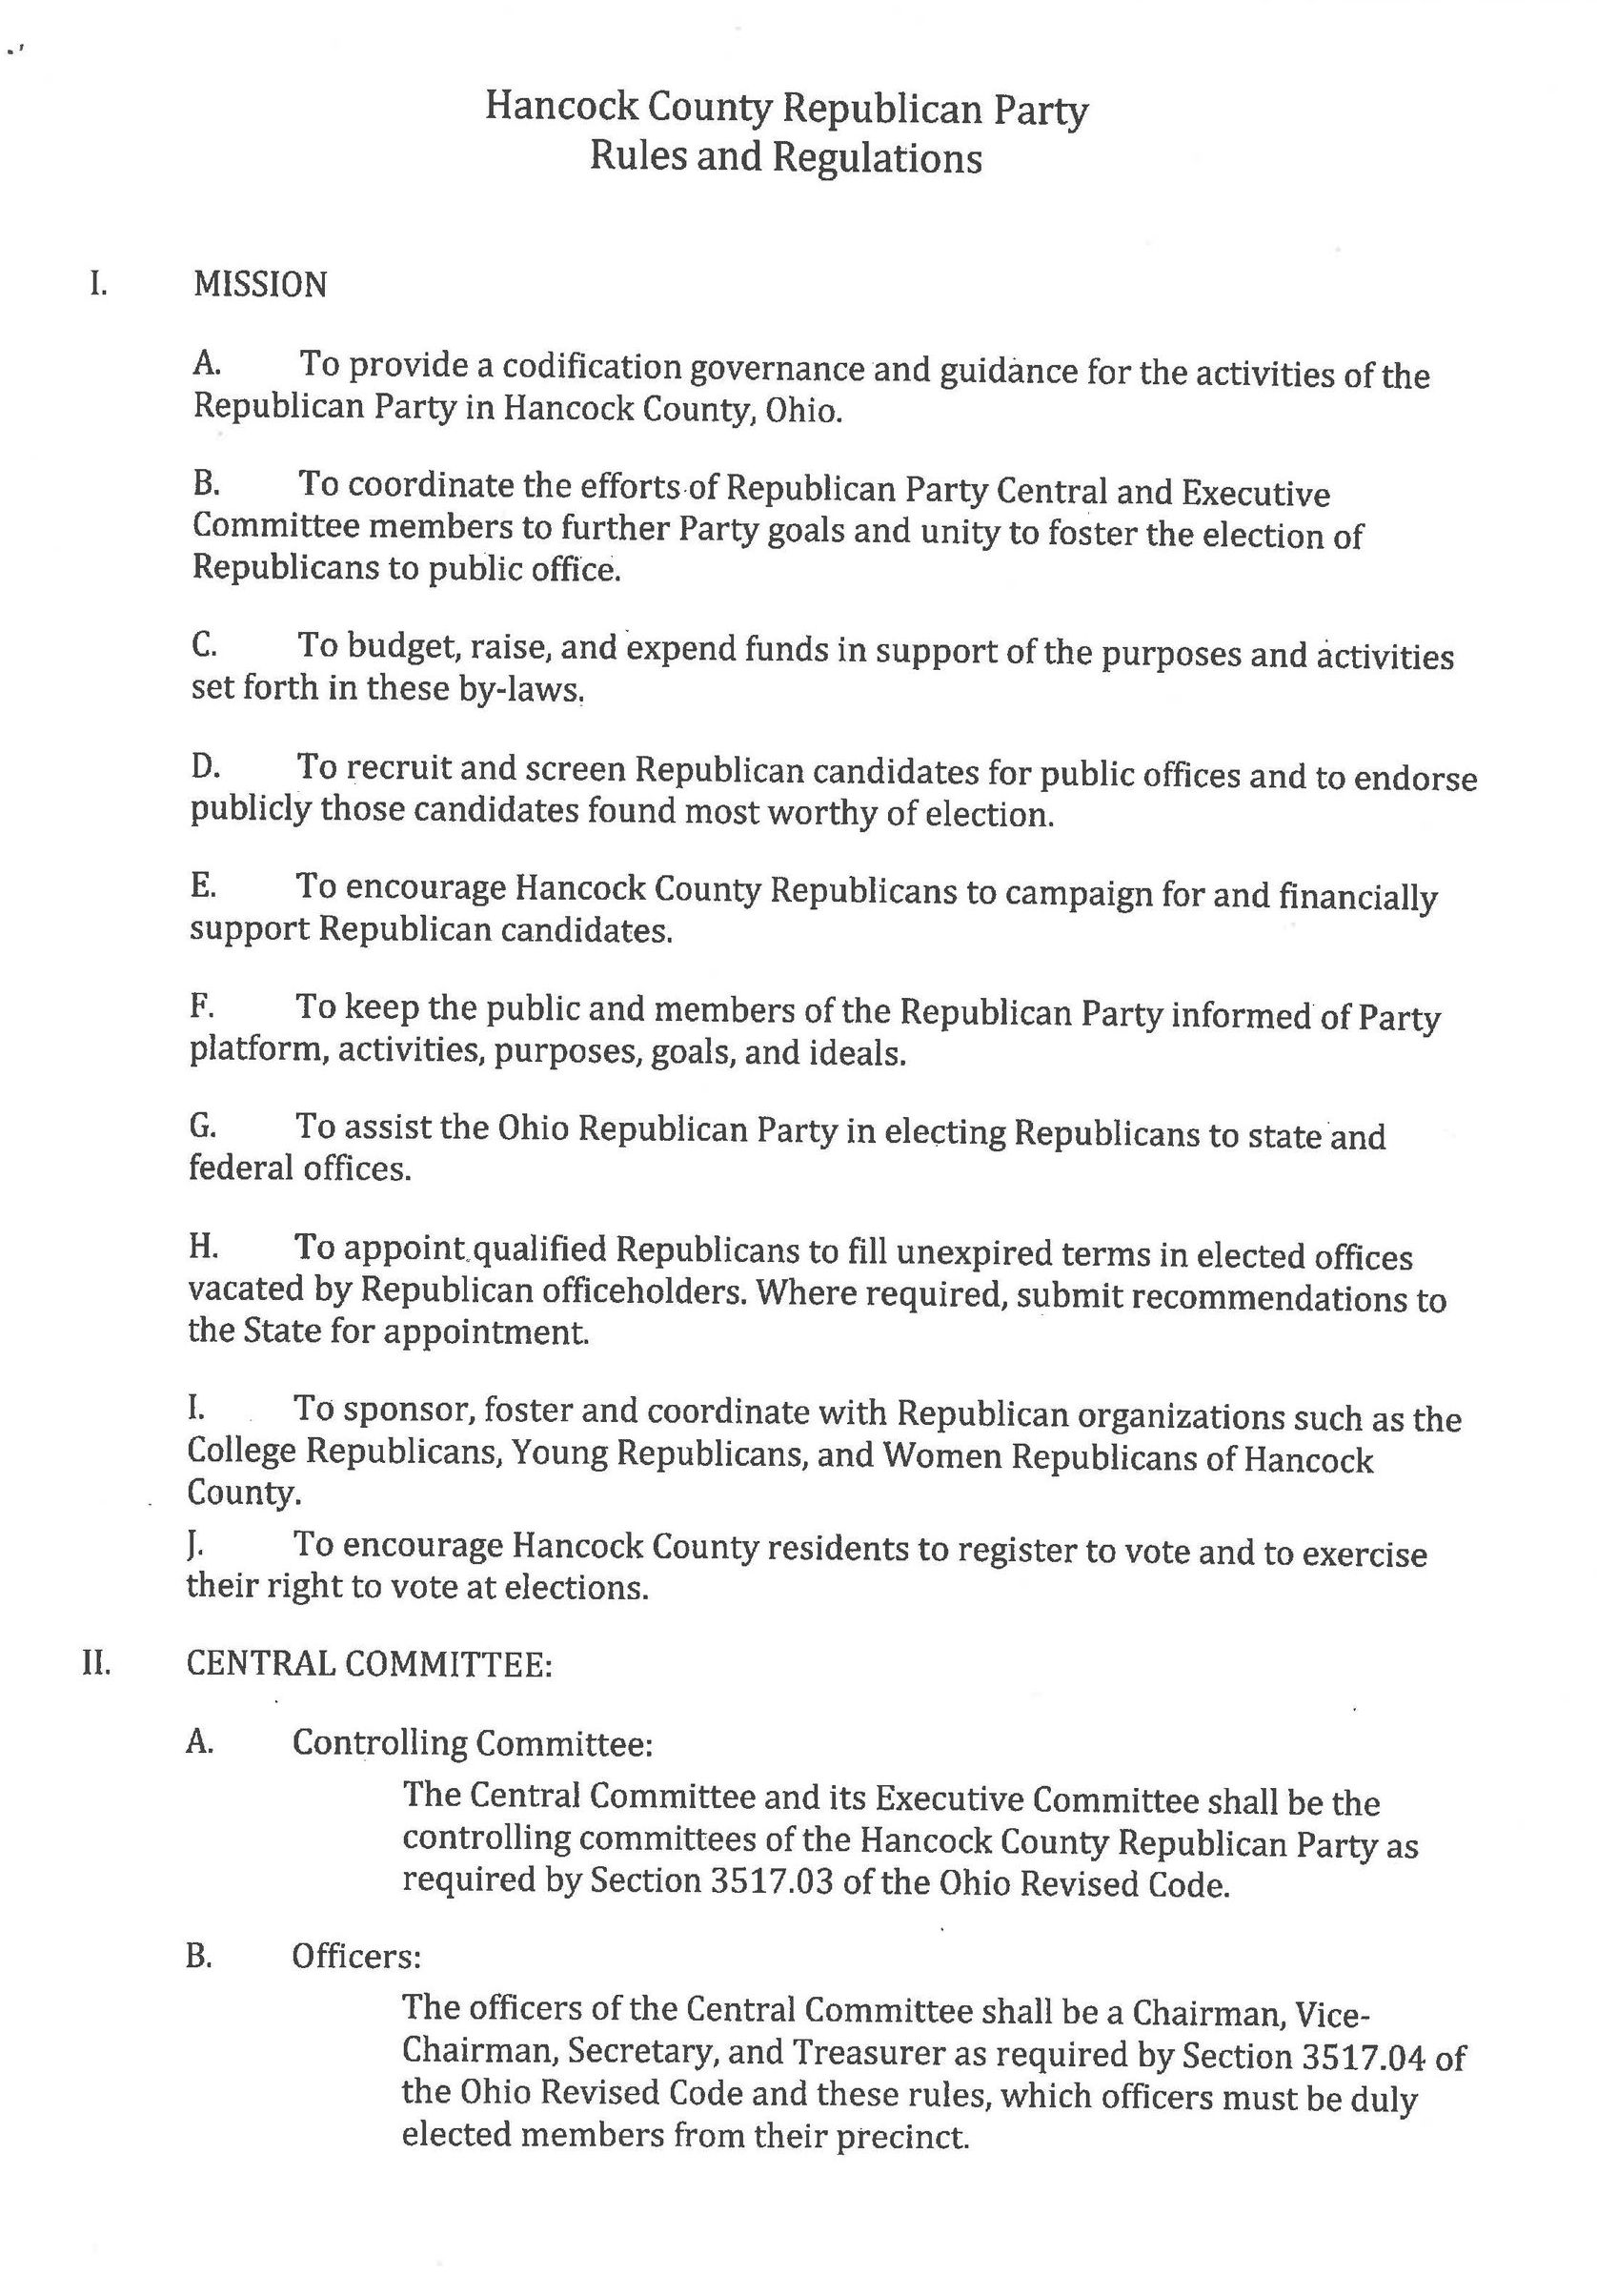 Hancock County Republican Party Rules and Regulations